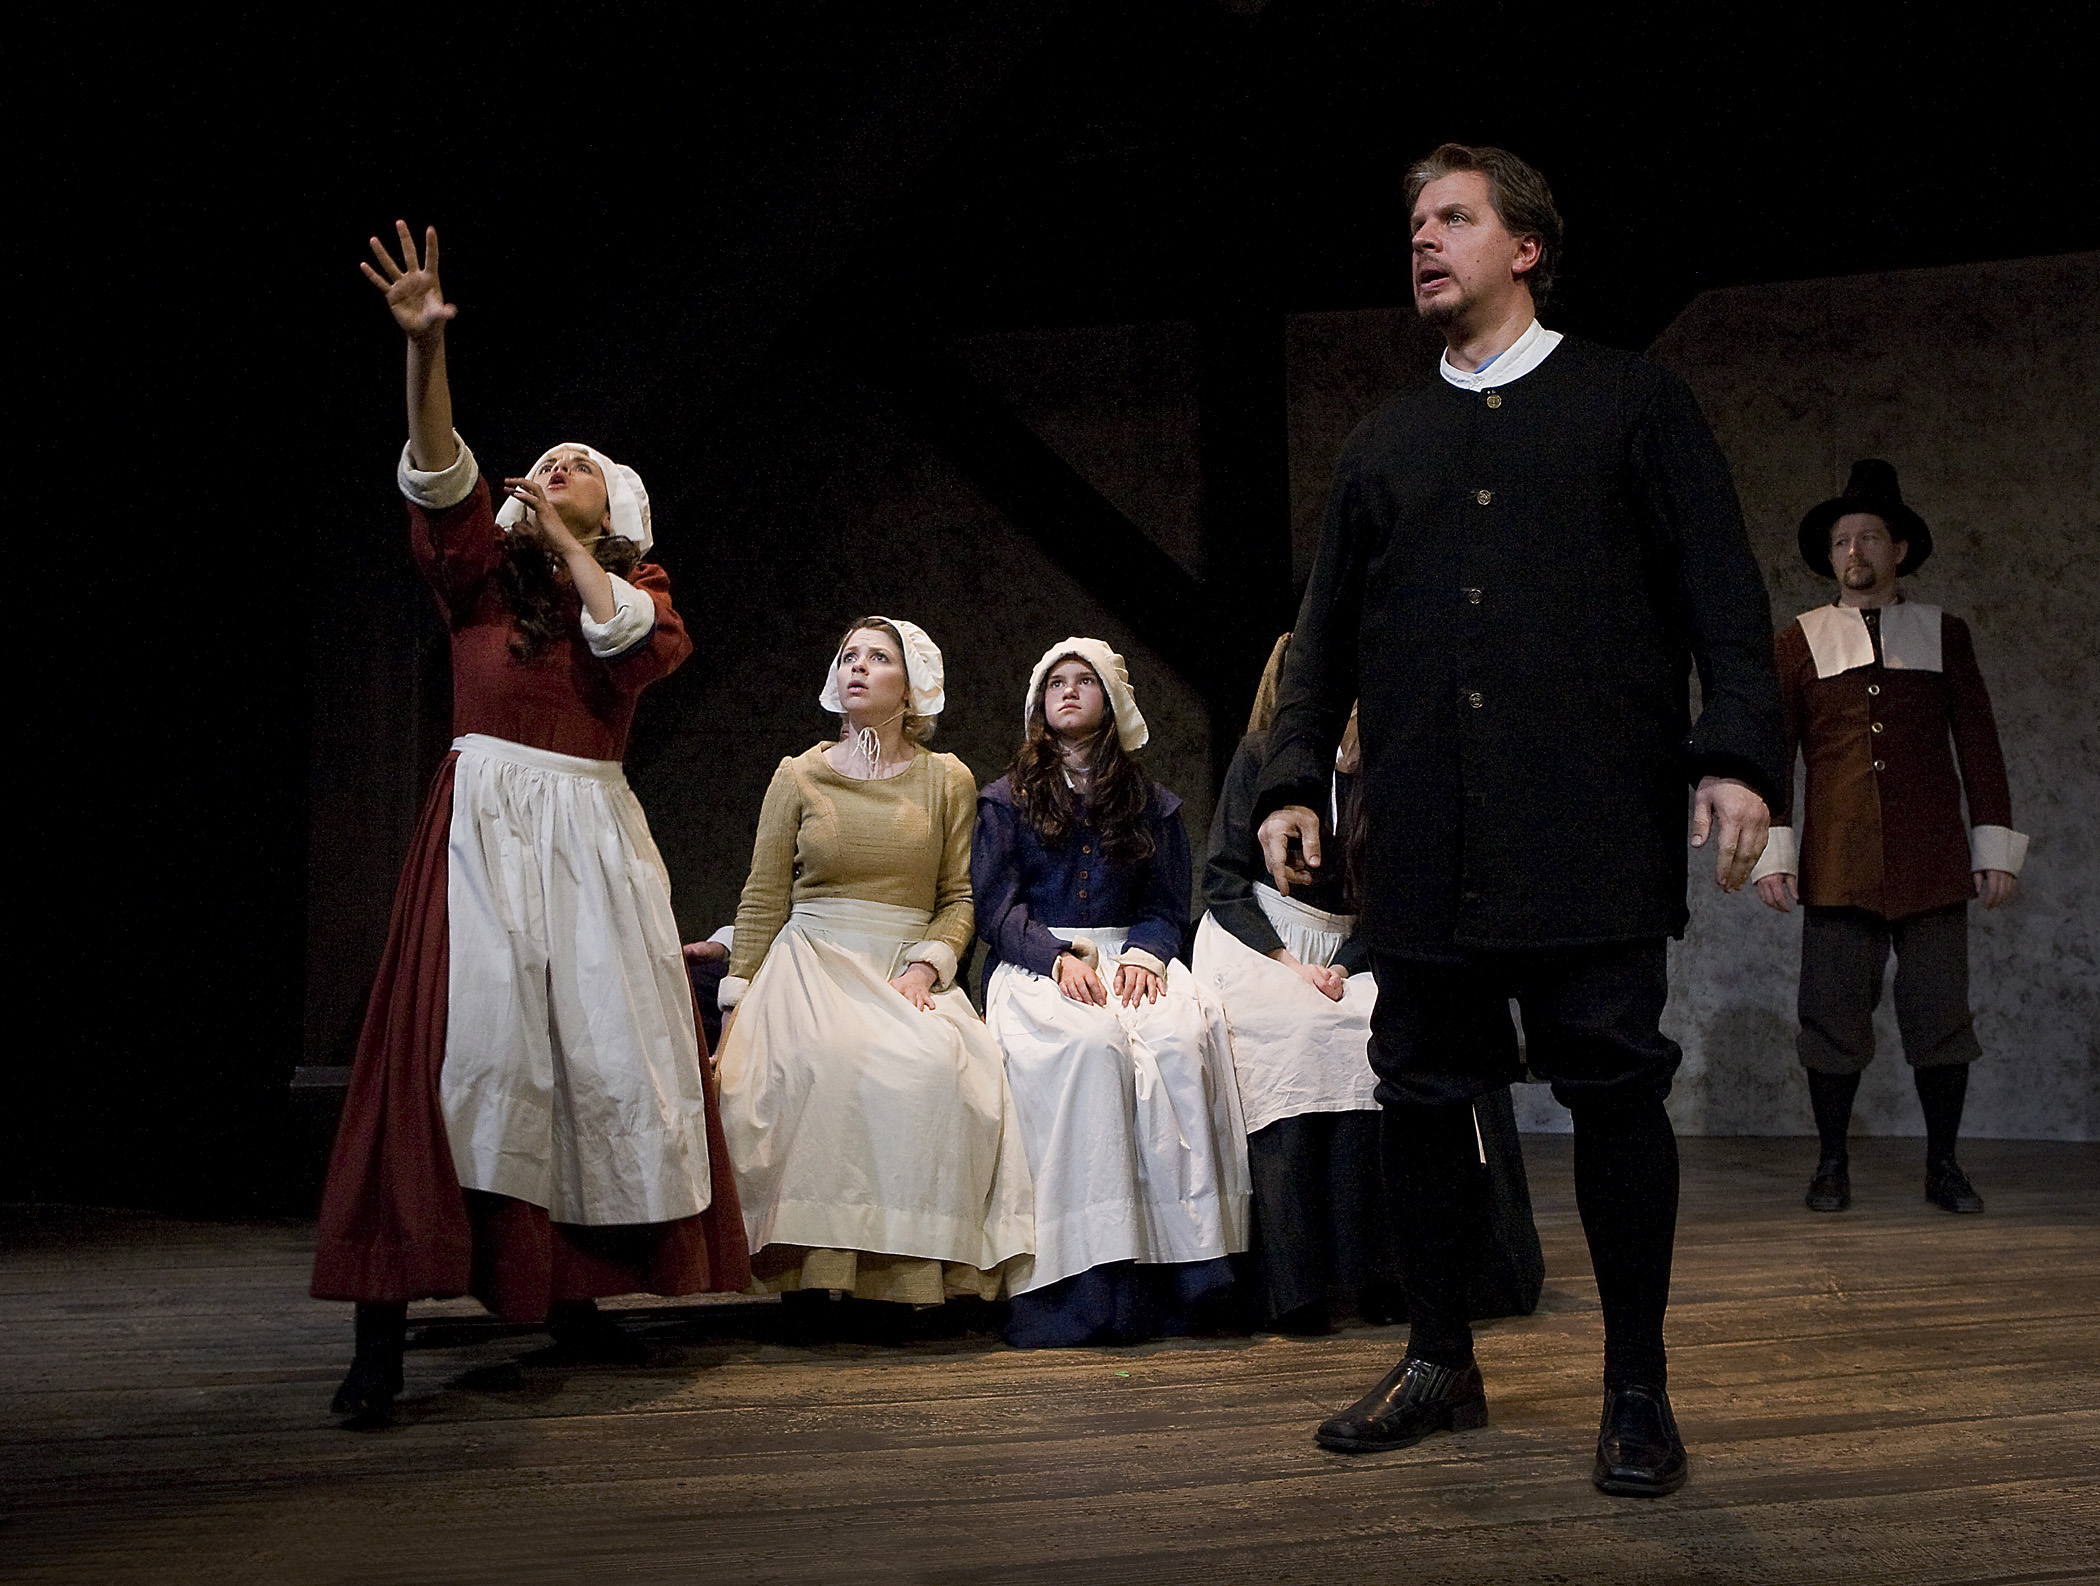 the crucible 2014 download free